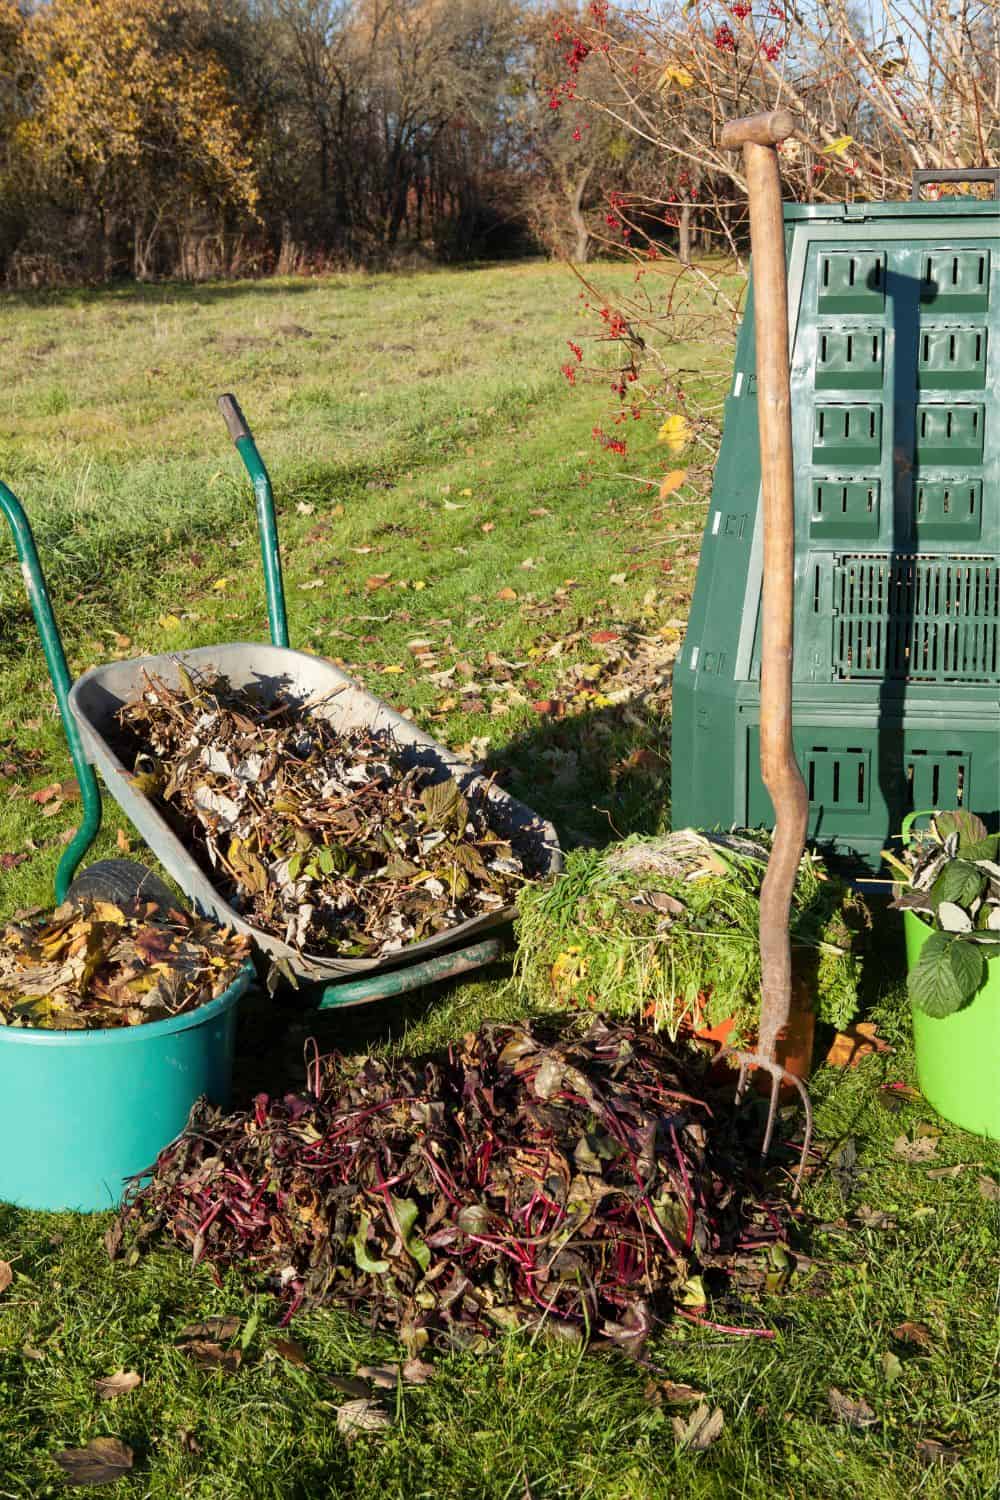 Factors Influencing the Rate of Composting